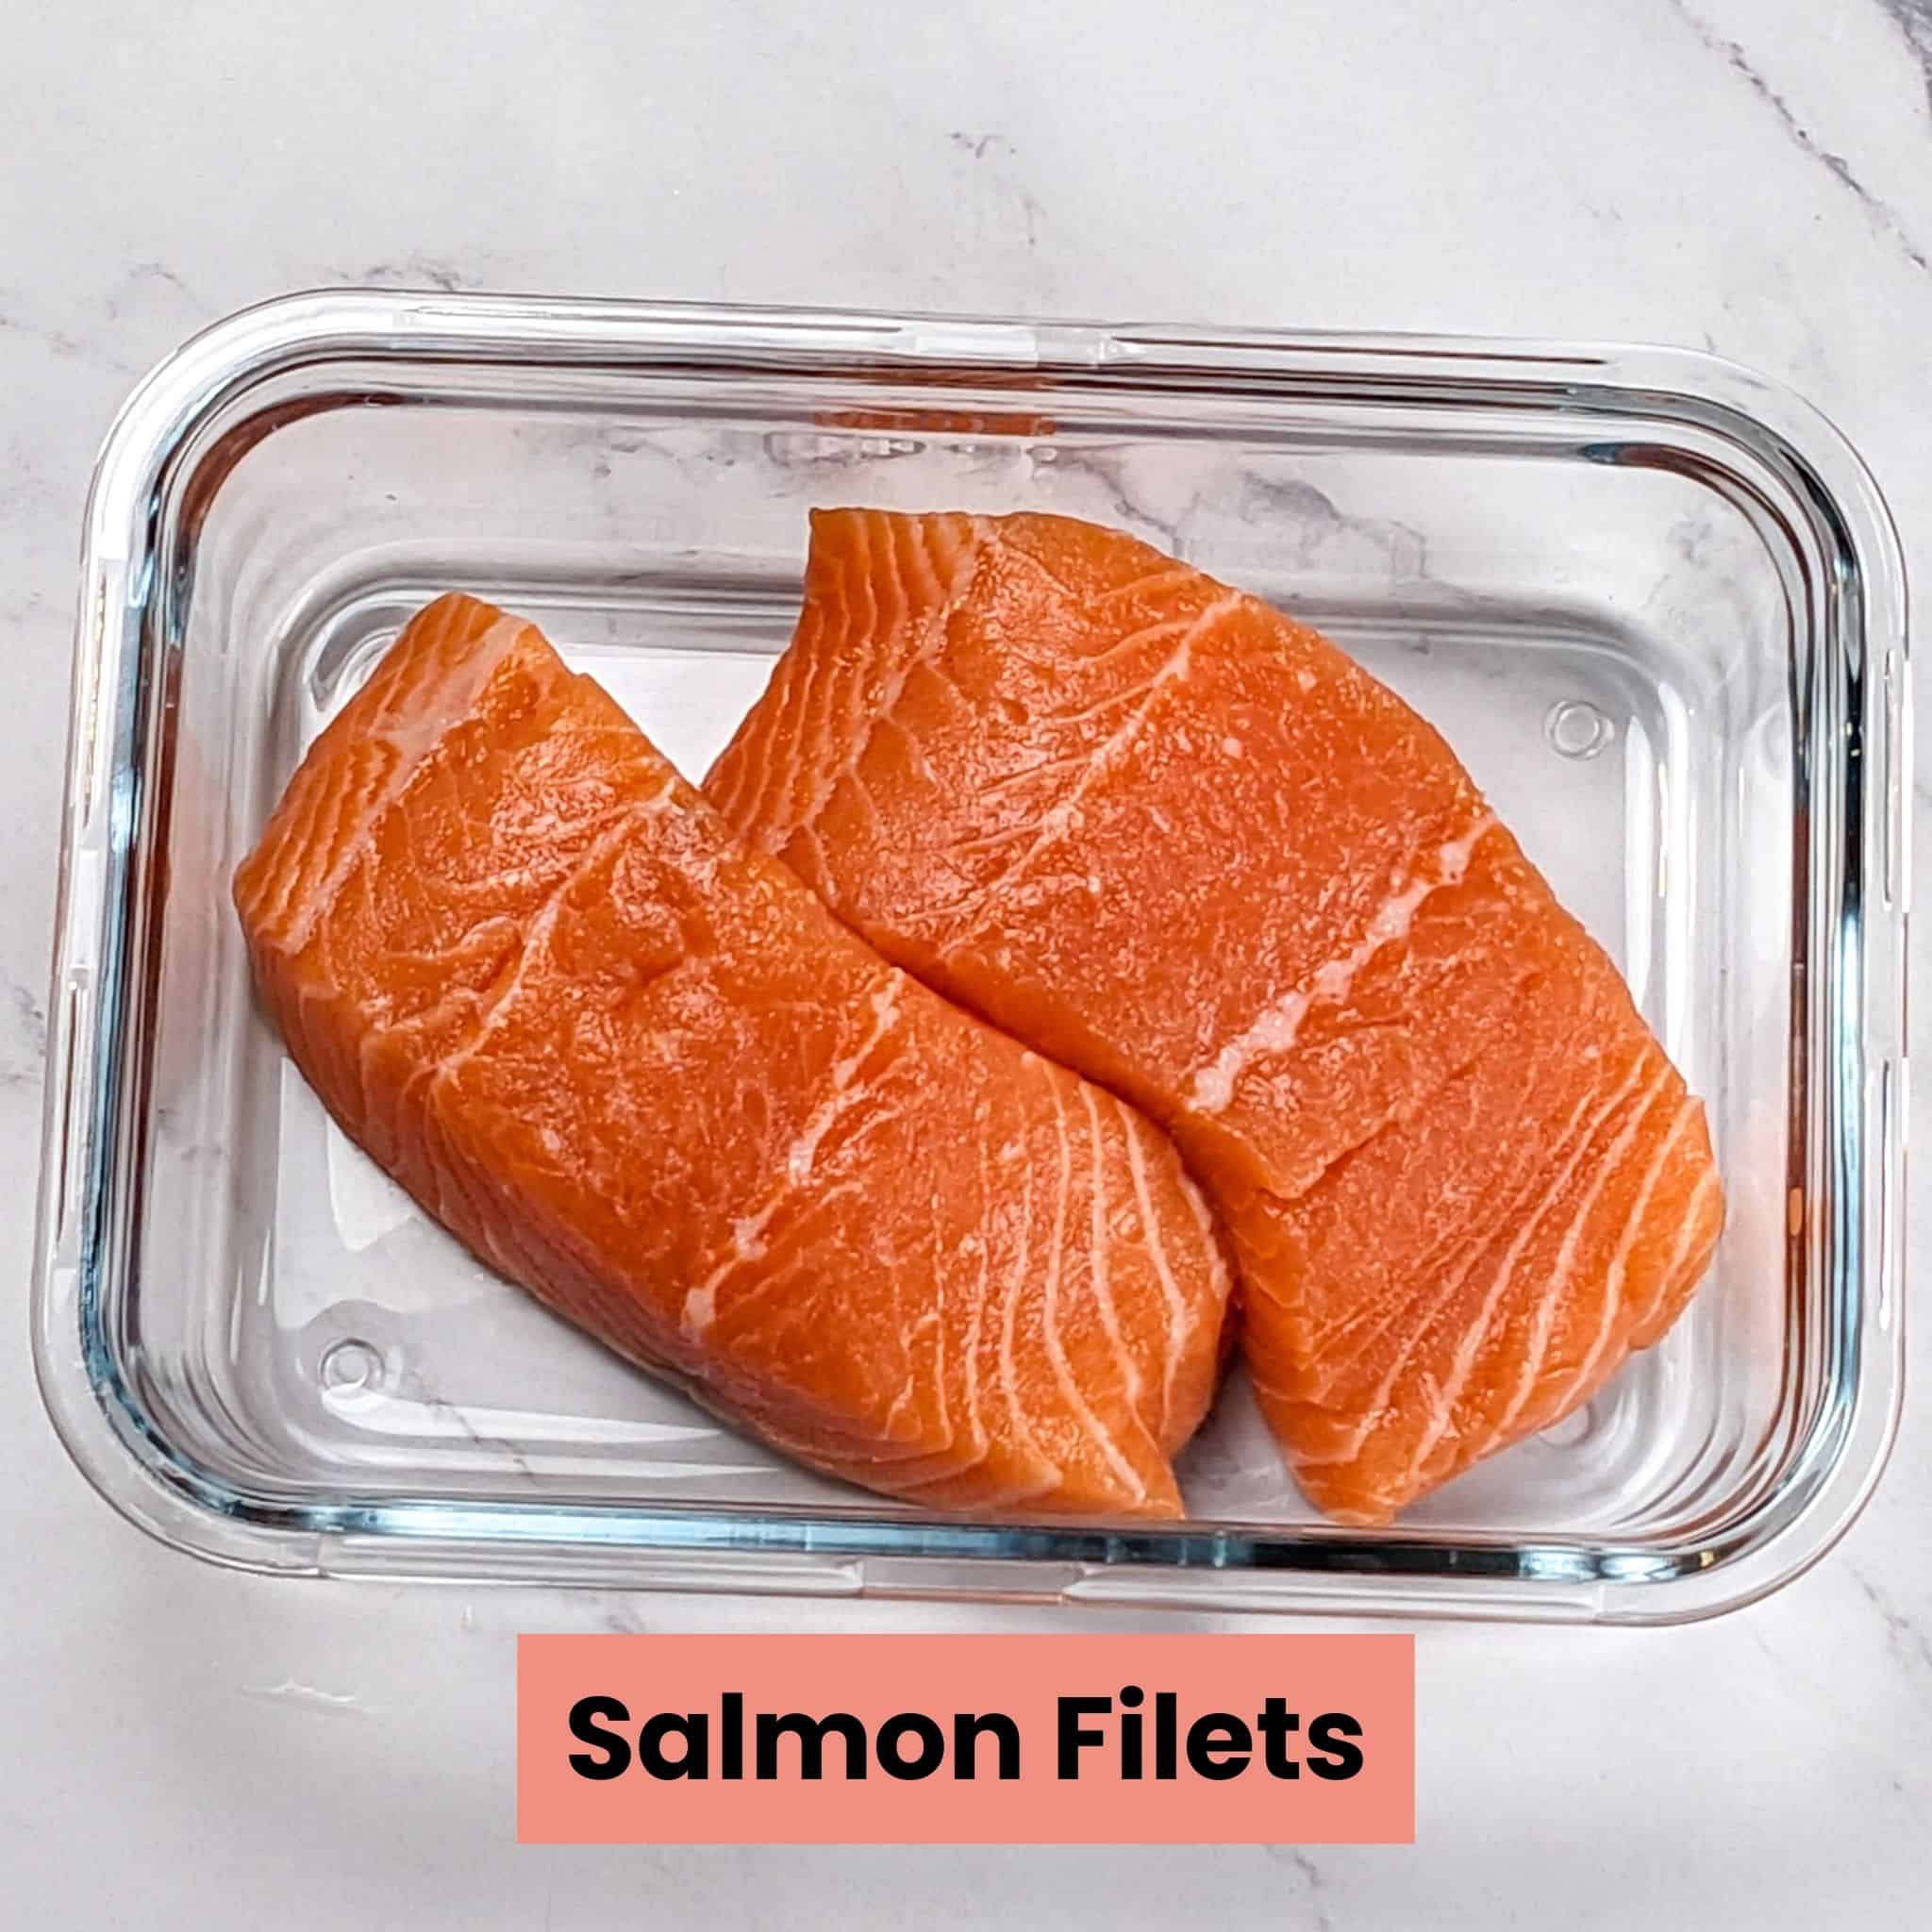 raw salmon filets in a glass rectangle container for the Chili Lime Salmon recipe.